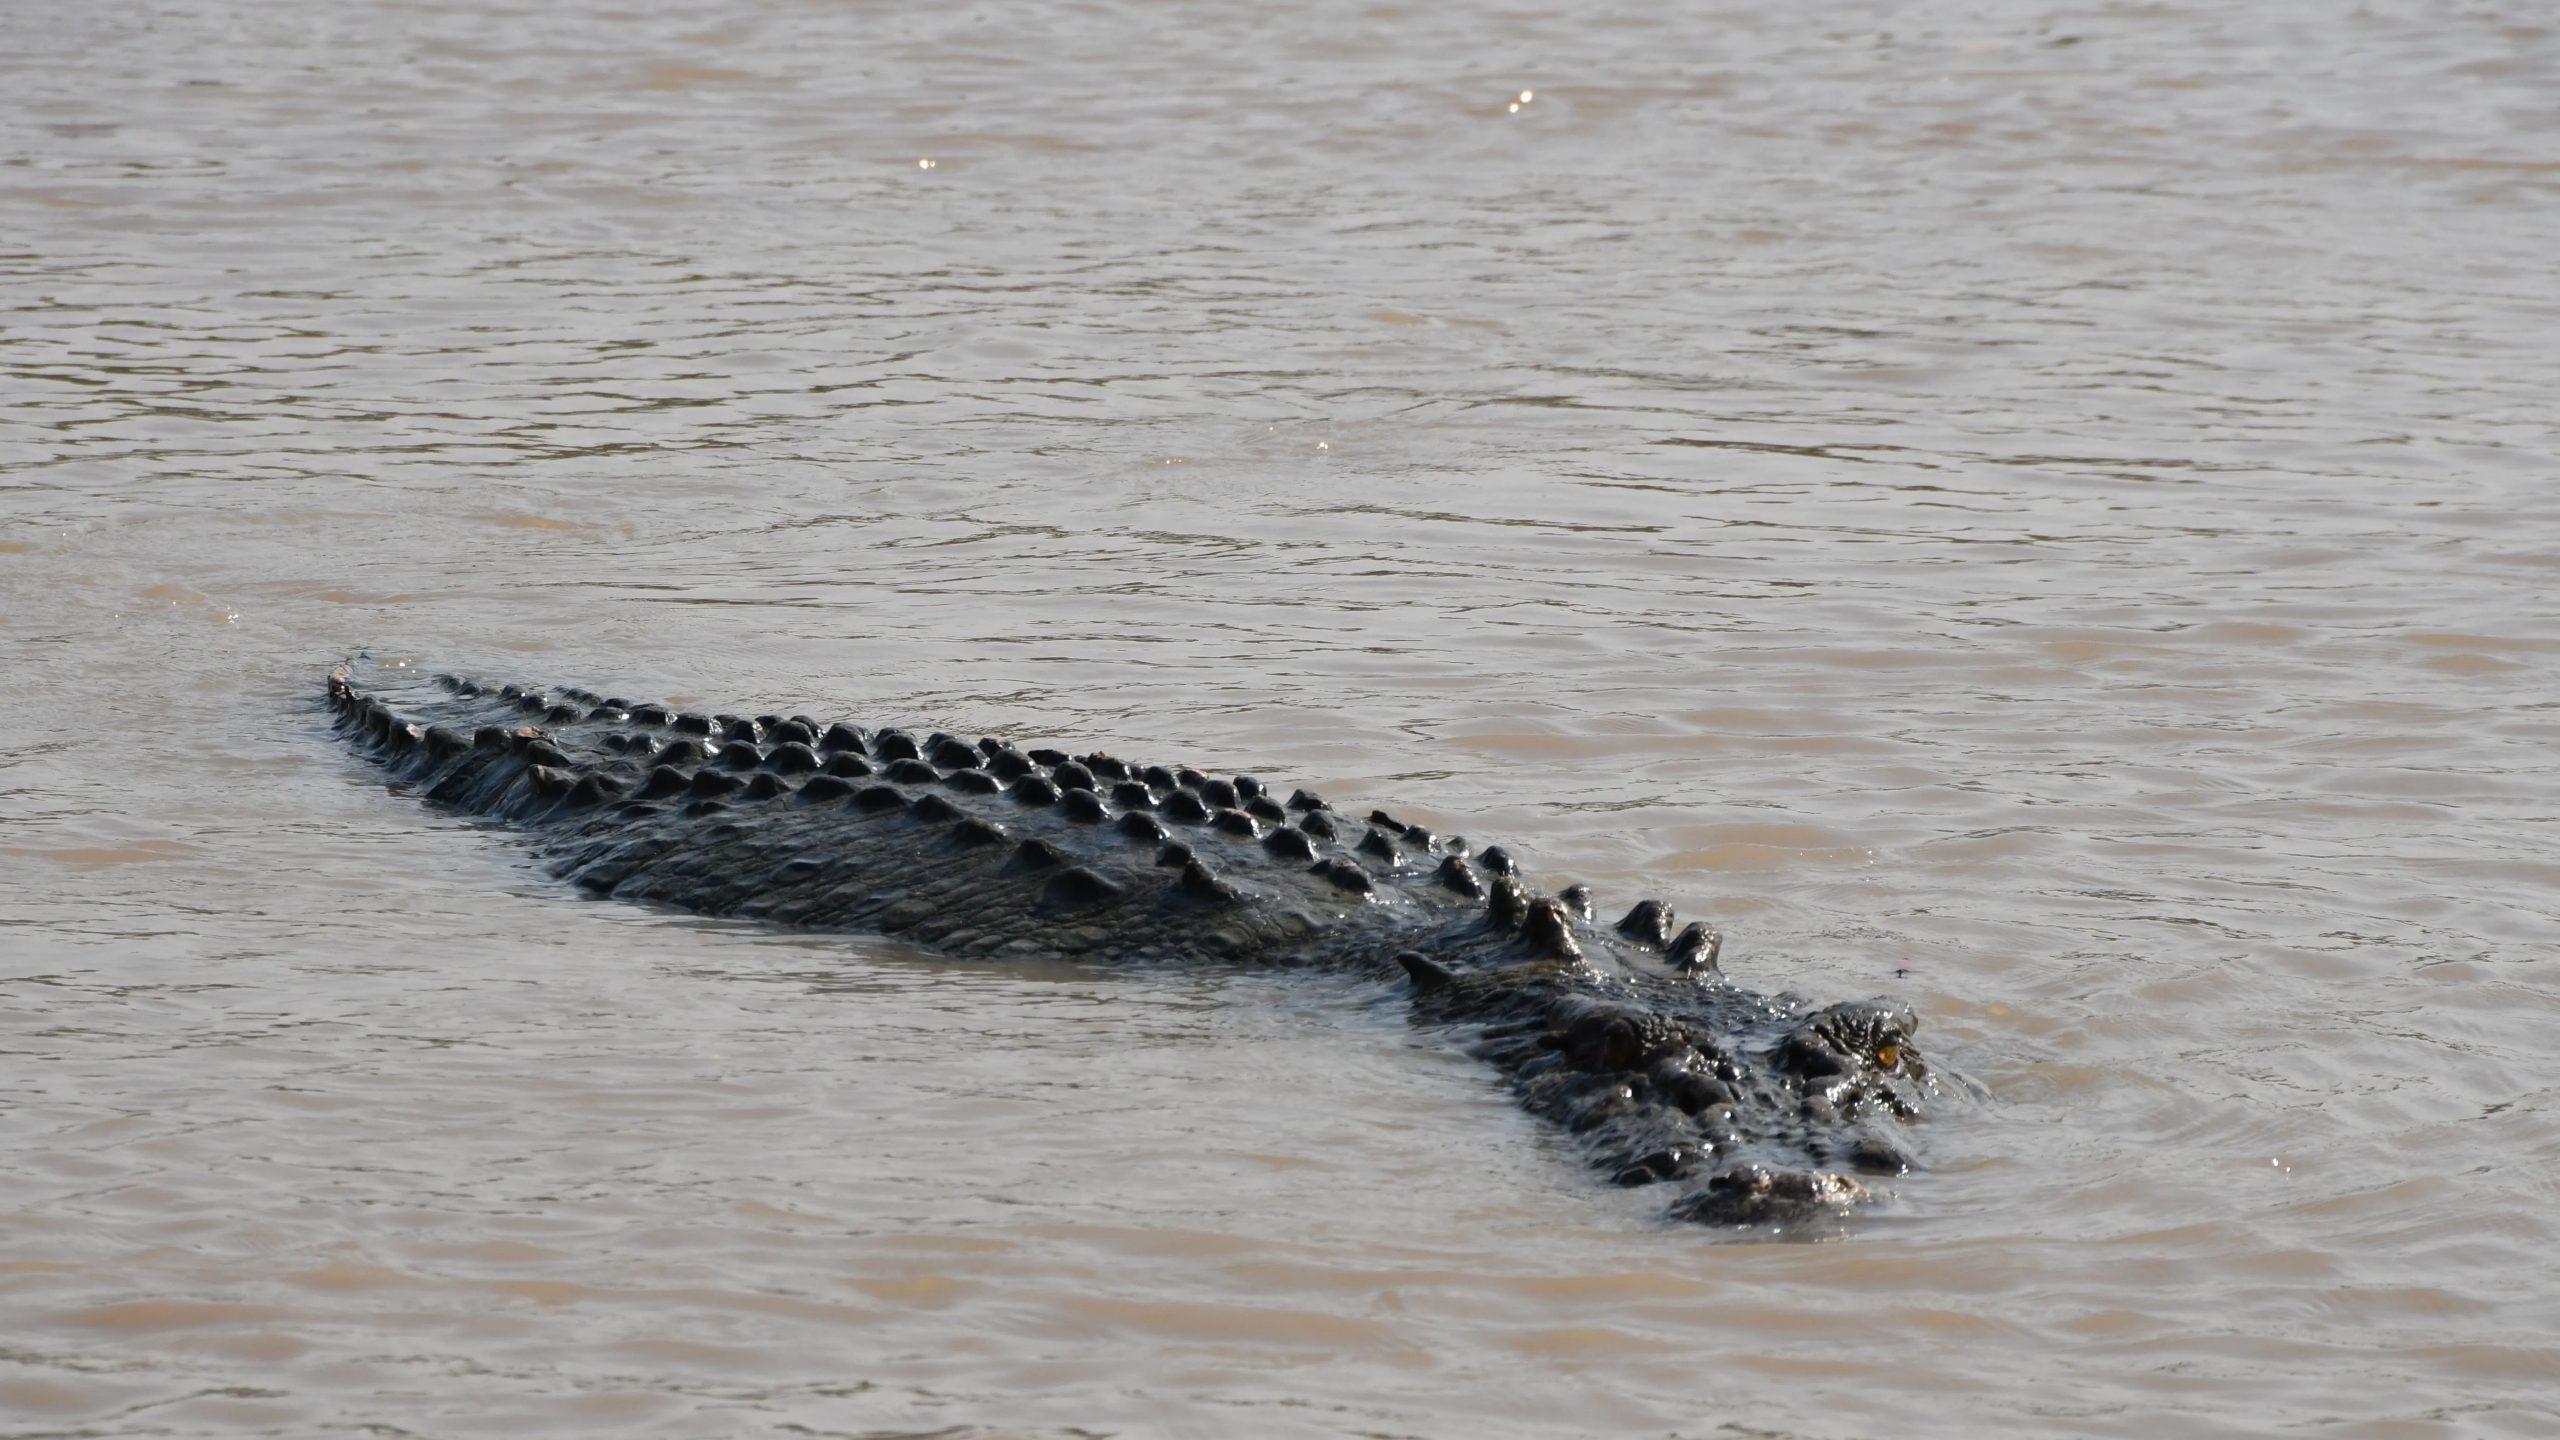 Man attacked by crocodile while attempting to take a selfie | Watch